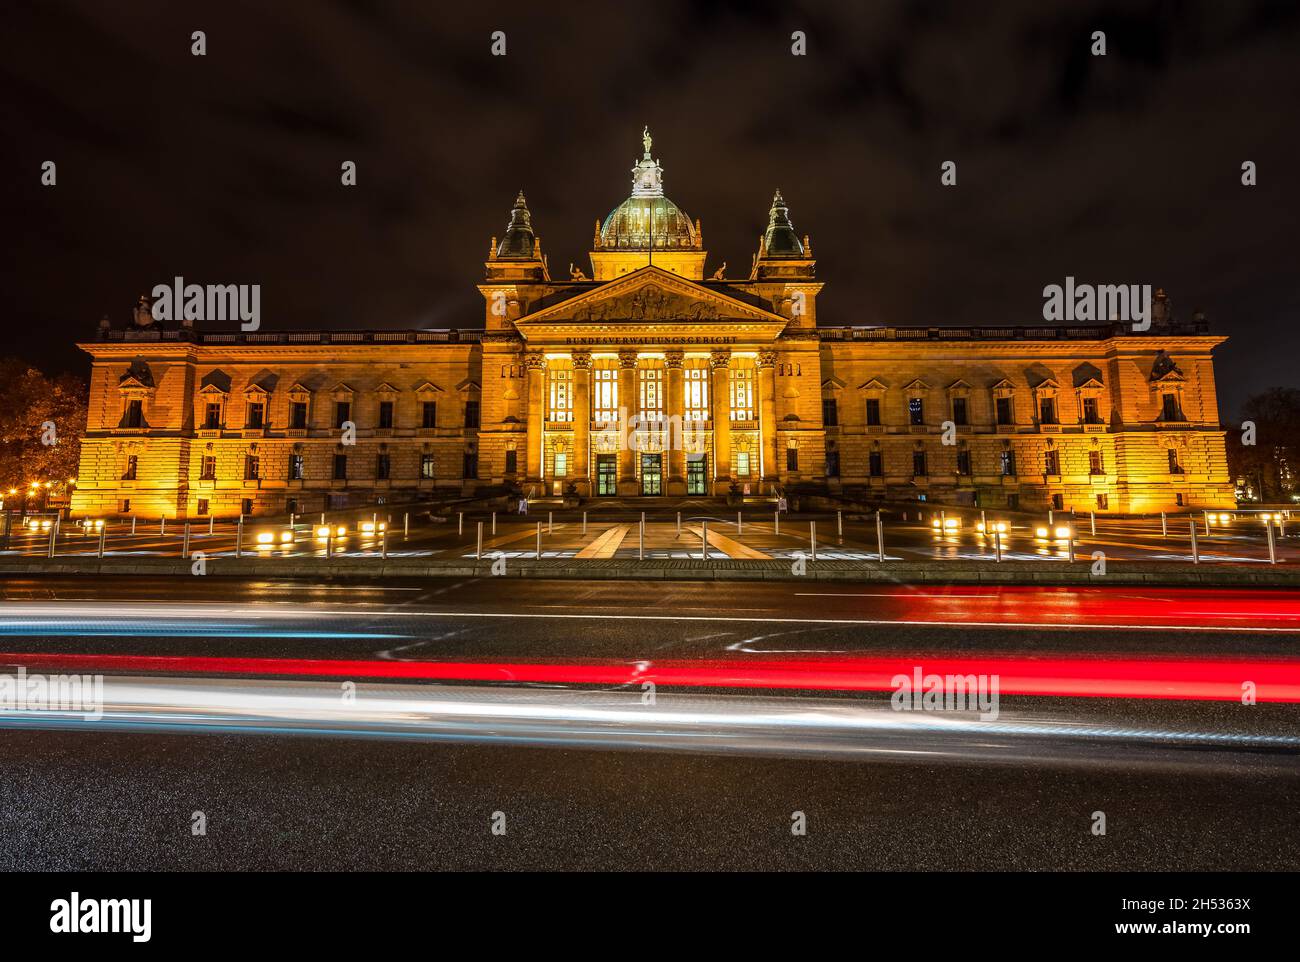 The illuminated historic building of the Federal Administrative Court (built between 1888 and 1895) in Leipzig (Germany). Stock Photo